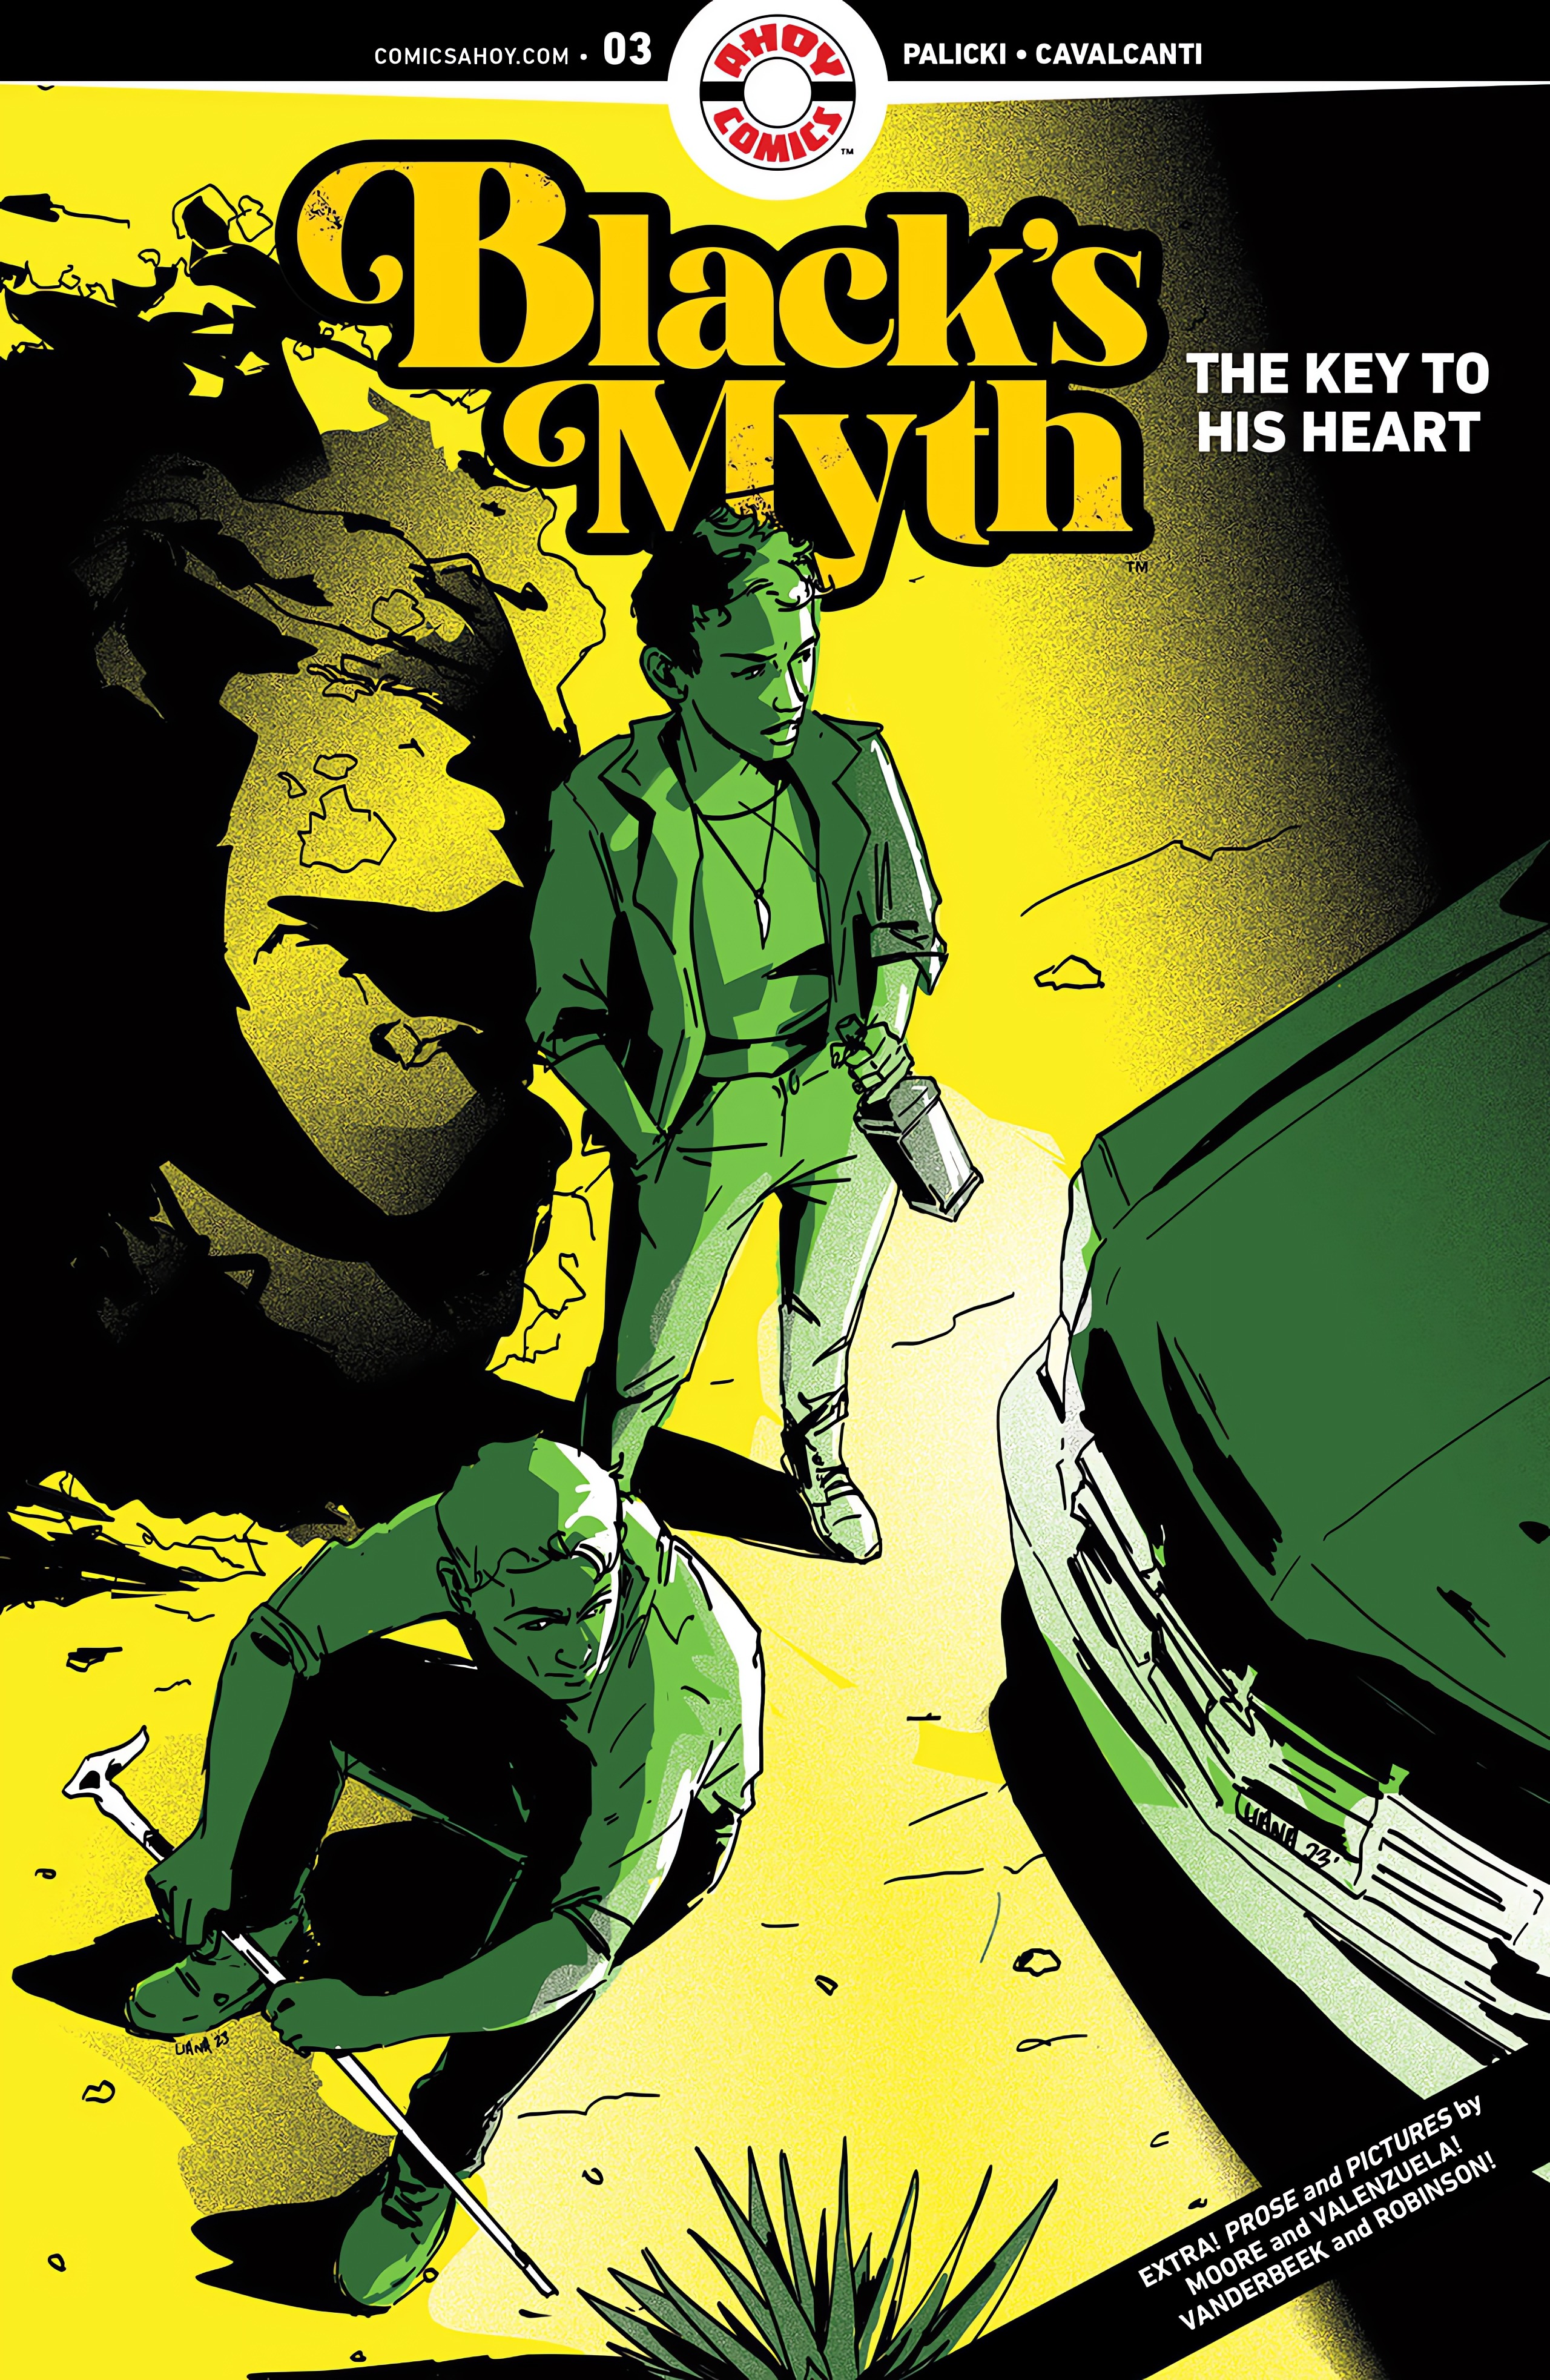 Read online Black’s Myth: The Key to His Heart comic -  Issue #3 - 1